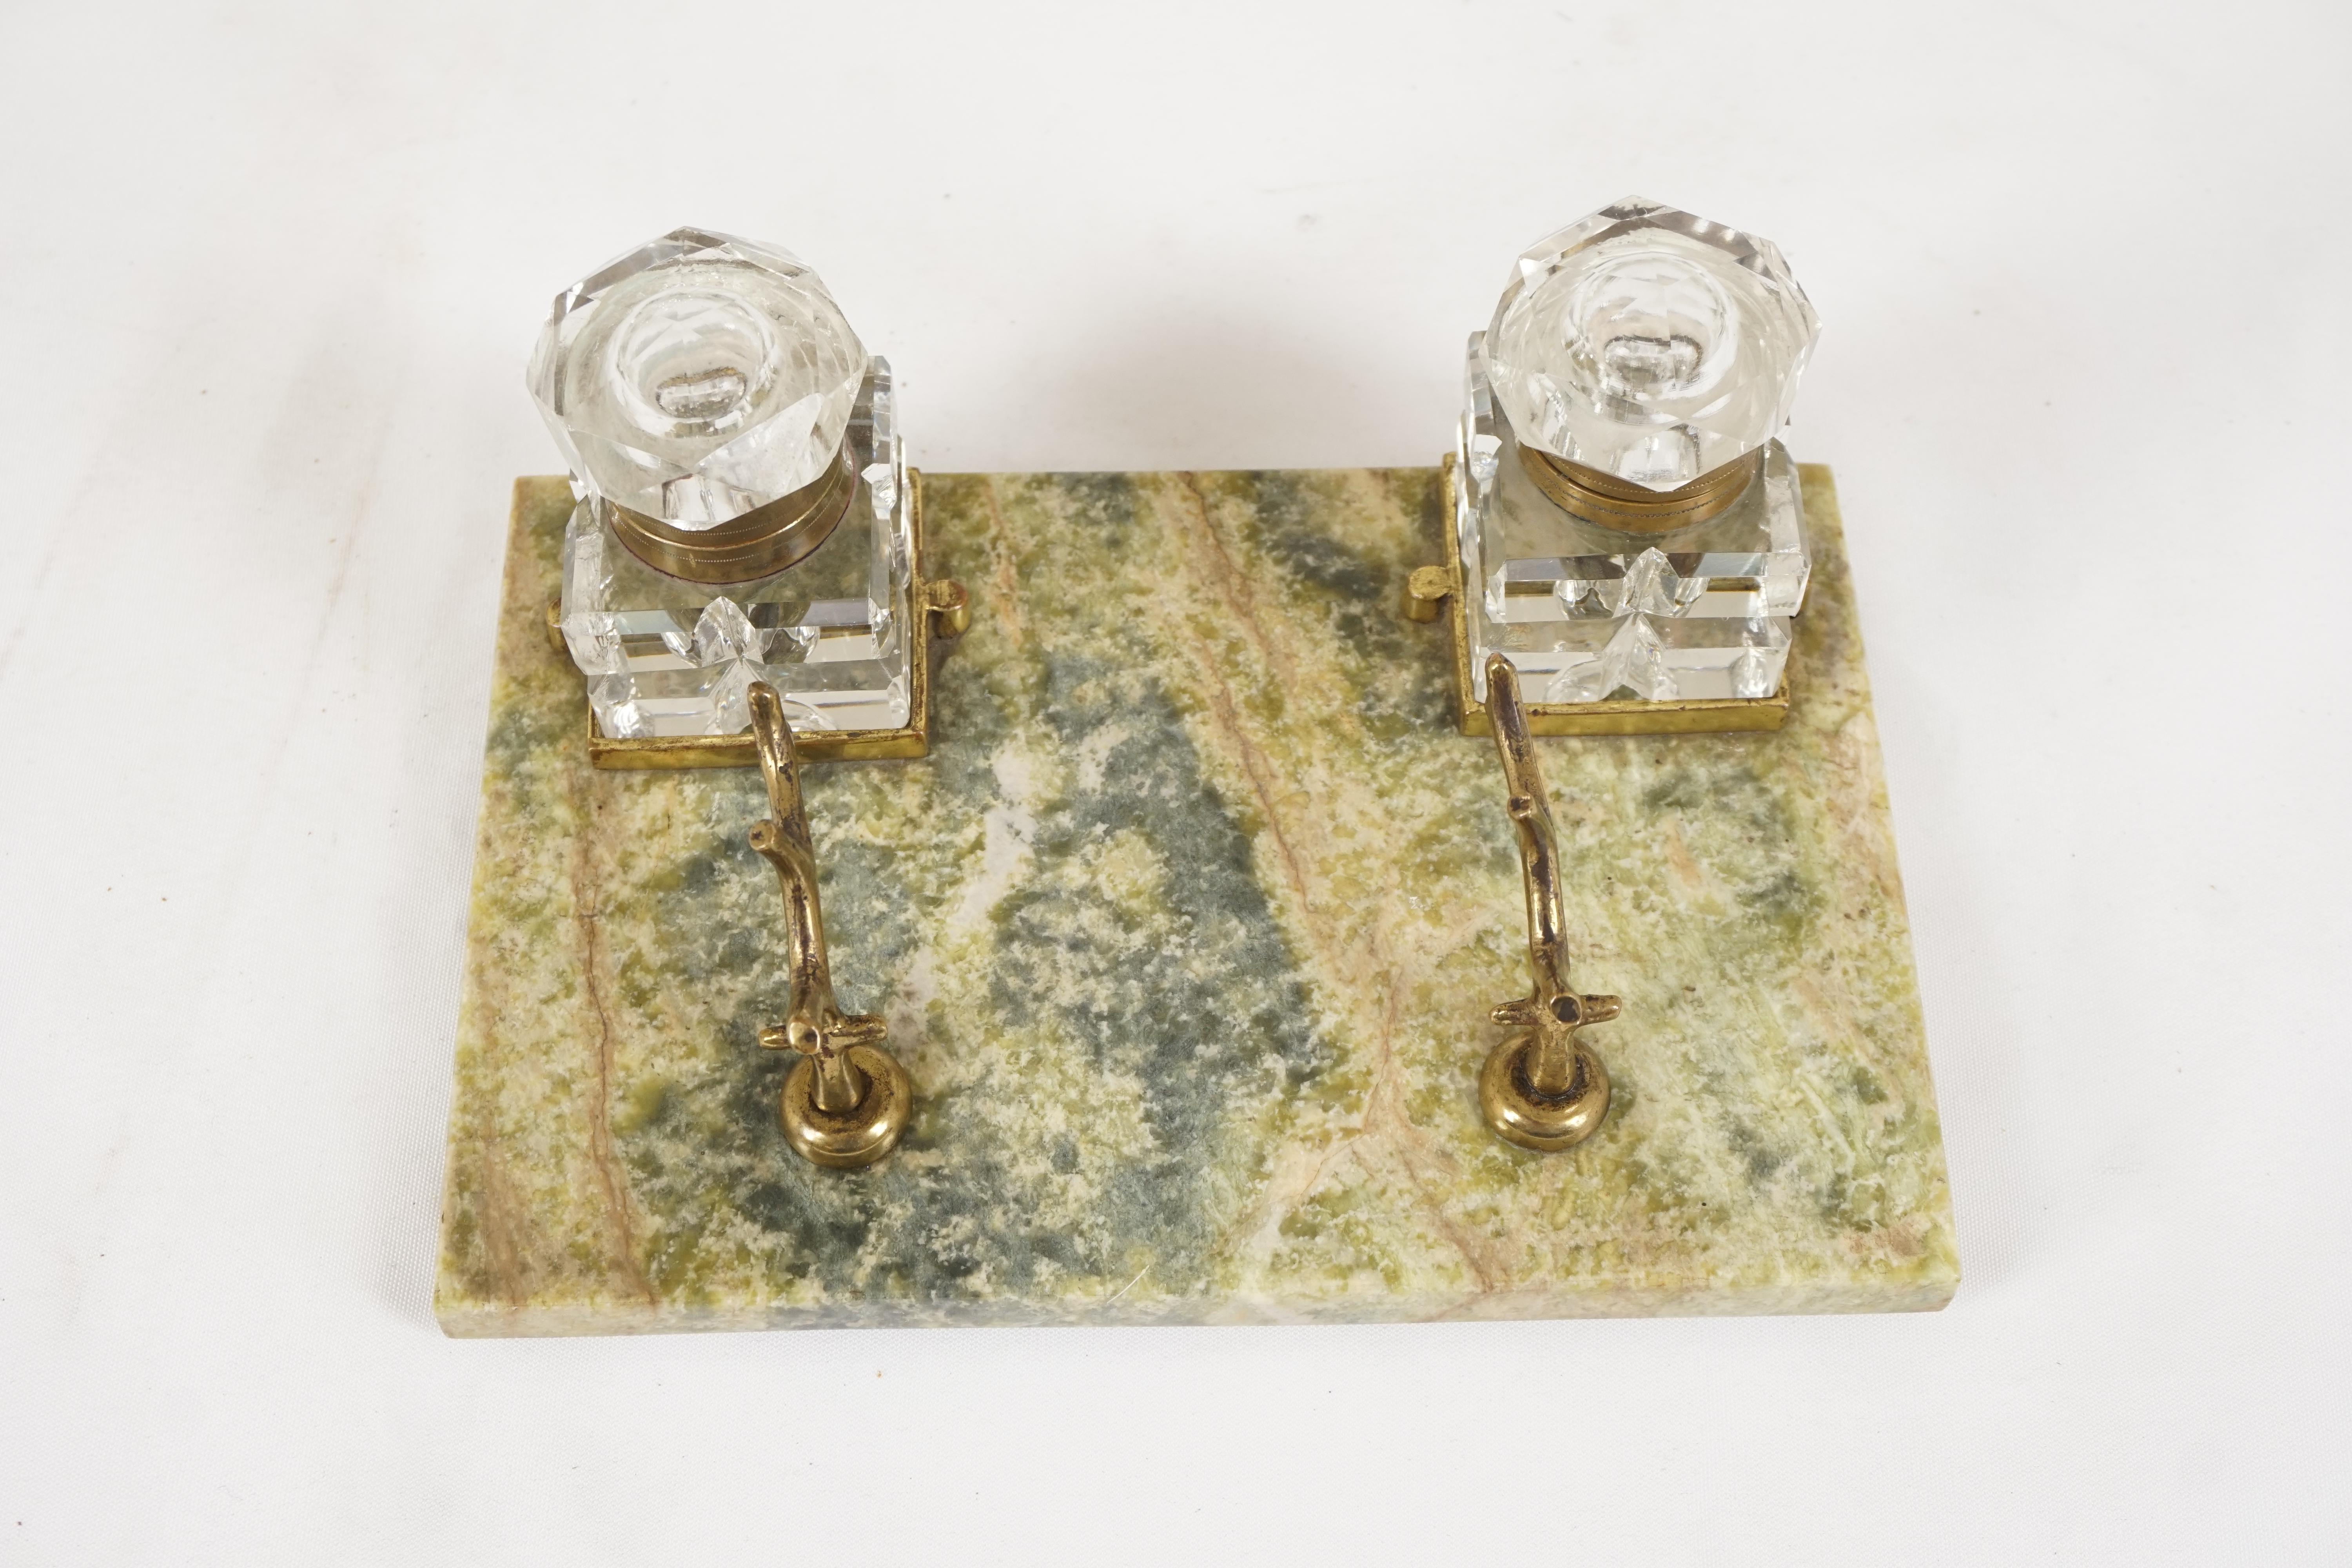 Antique Inkstand, Green Marble, Scotland 1900, H562

Scotland 1900
Green Marble
Pair of two crystal inkwells and lids 
Brass pen rest to the front
All standing on green marble base

H562

Measures: 7 7/8